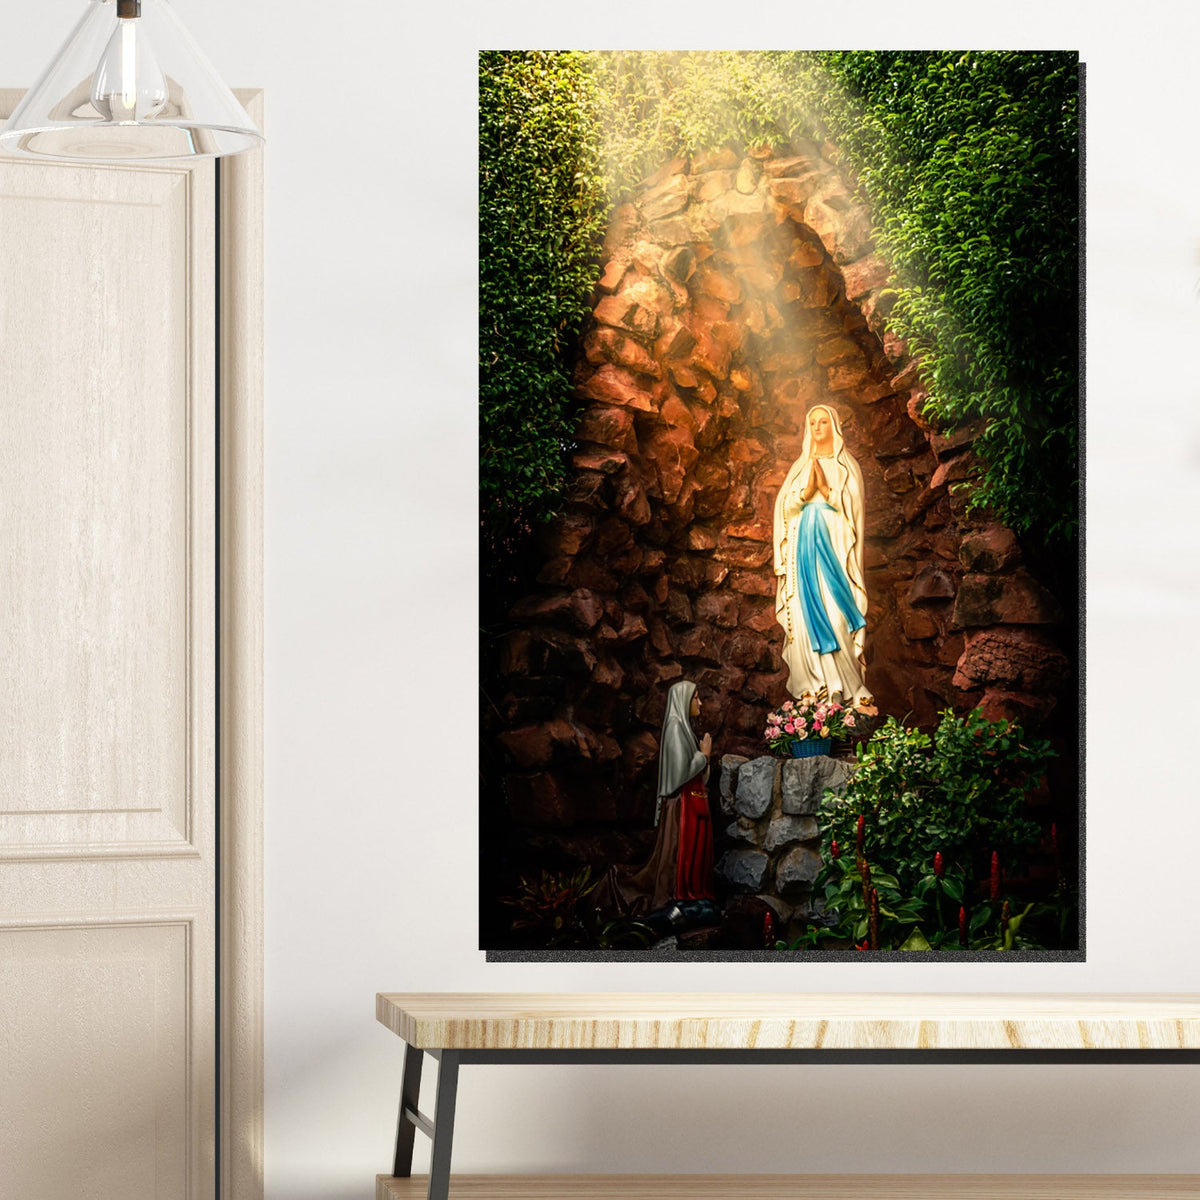 https://cdn.shopify.com/s/files/1/0387/9986/8044/products/BlessedVirginMaryinGrottoCanvasArtprintStretched-1.jpg